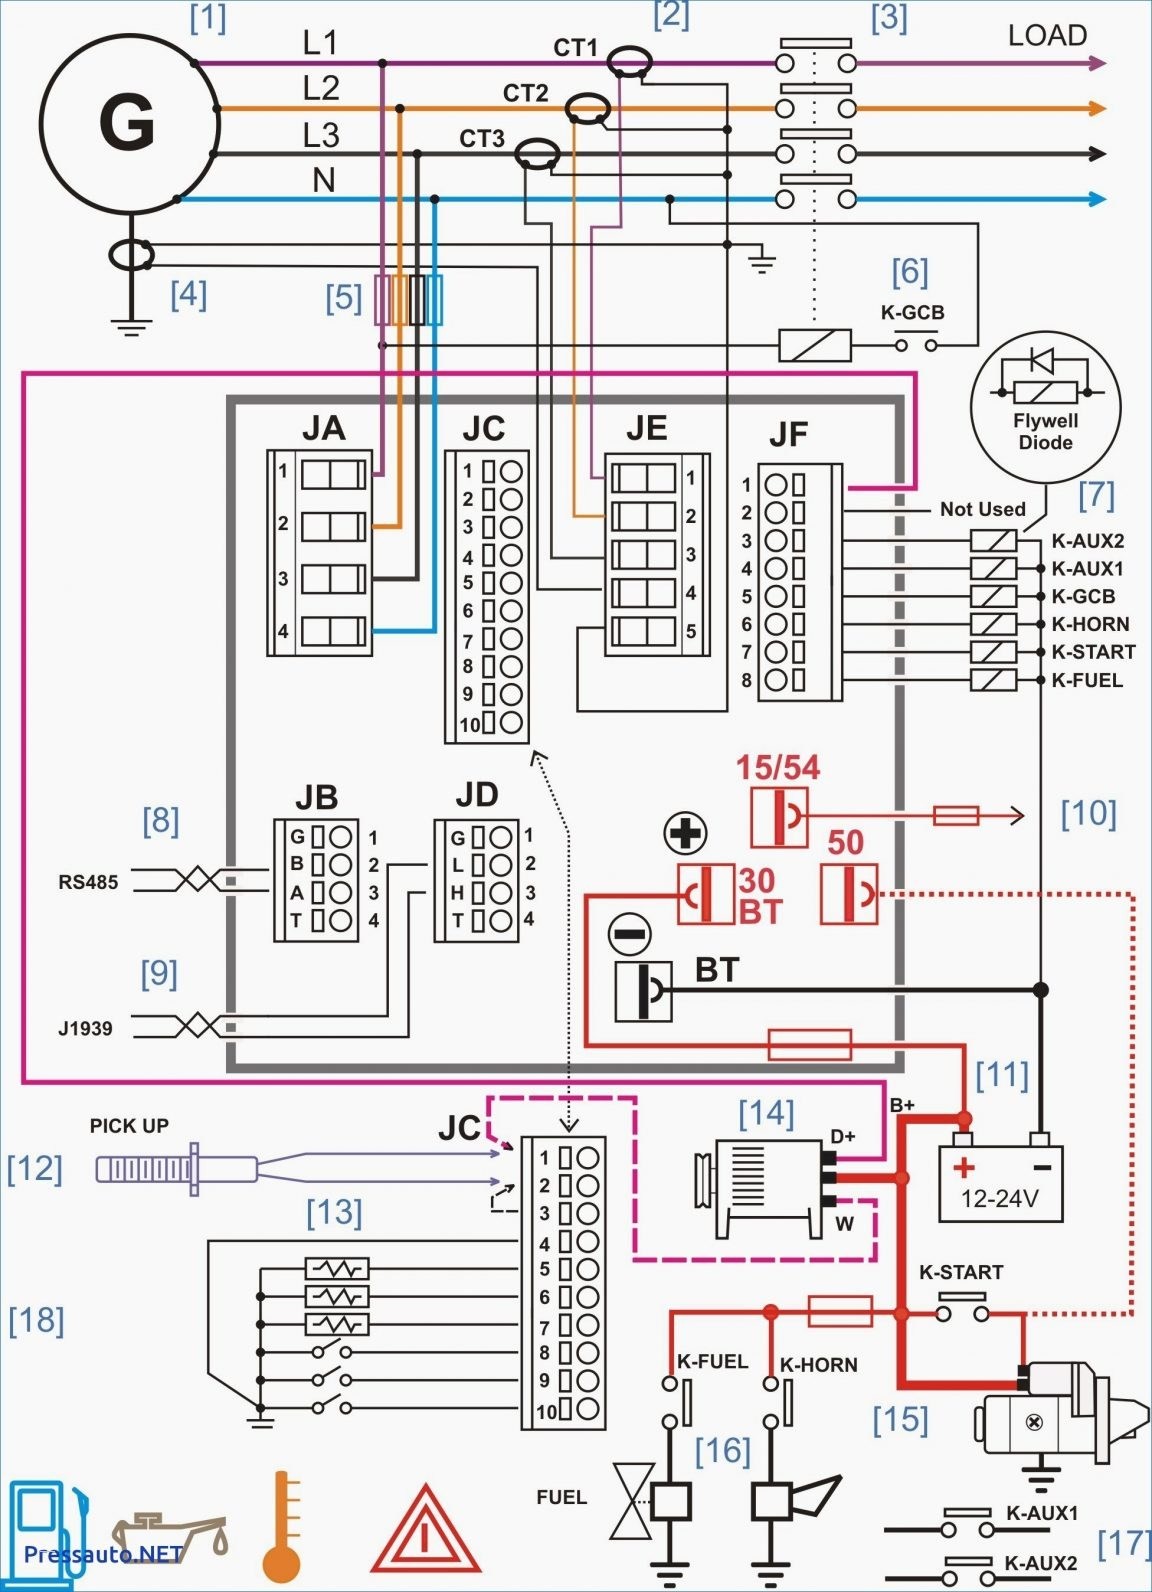 Generator Wiring Diagram and Electrical Schematics Download Manual Generator Transfer Switch Wiring Diagram Amp Automatic